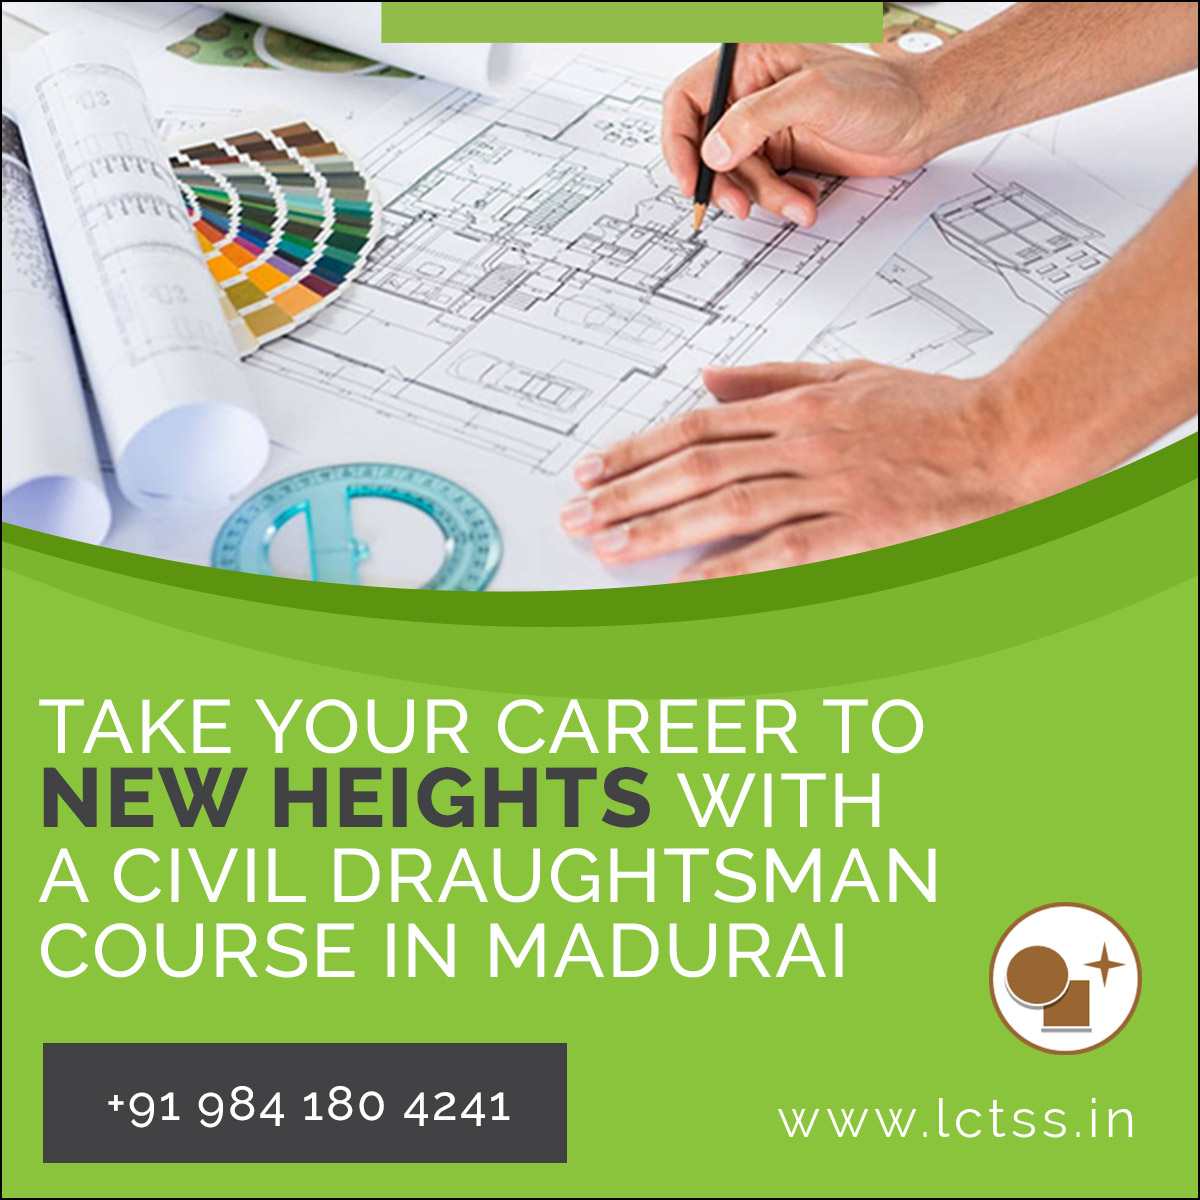 Take Your Career to New Heights with a Civil Draughtsman Course in Madurai